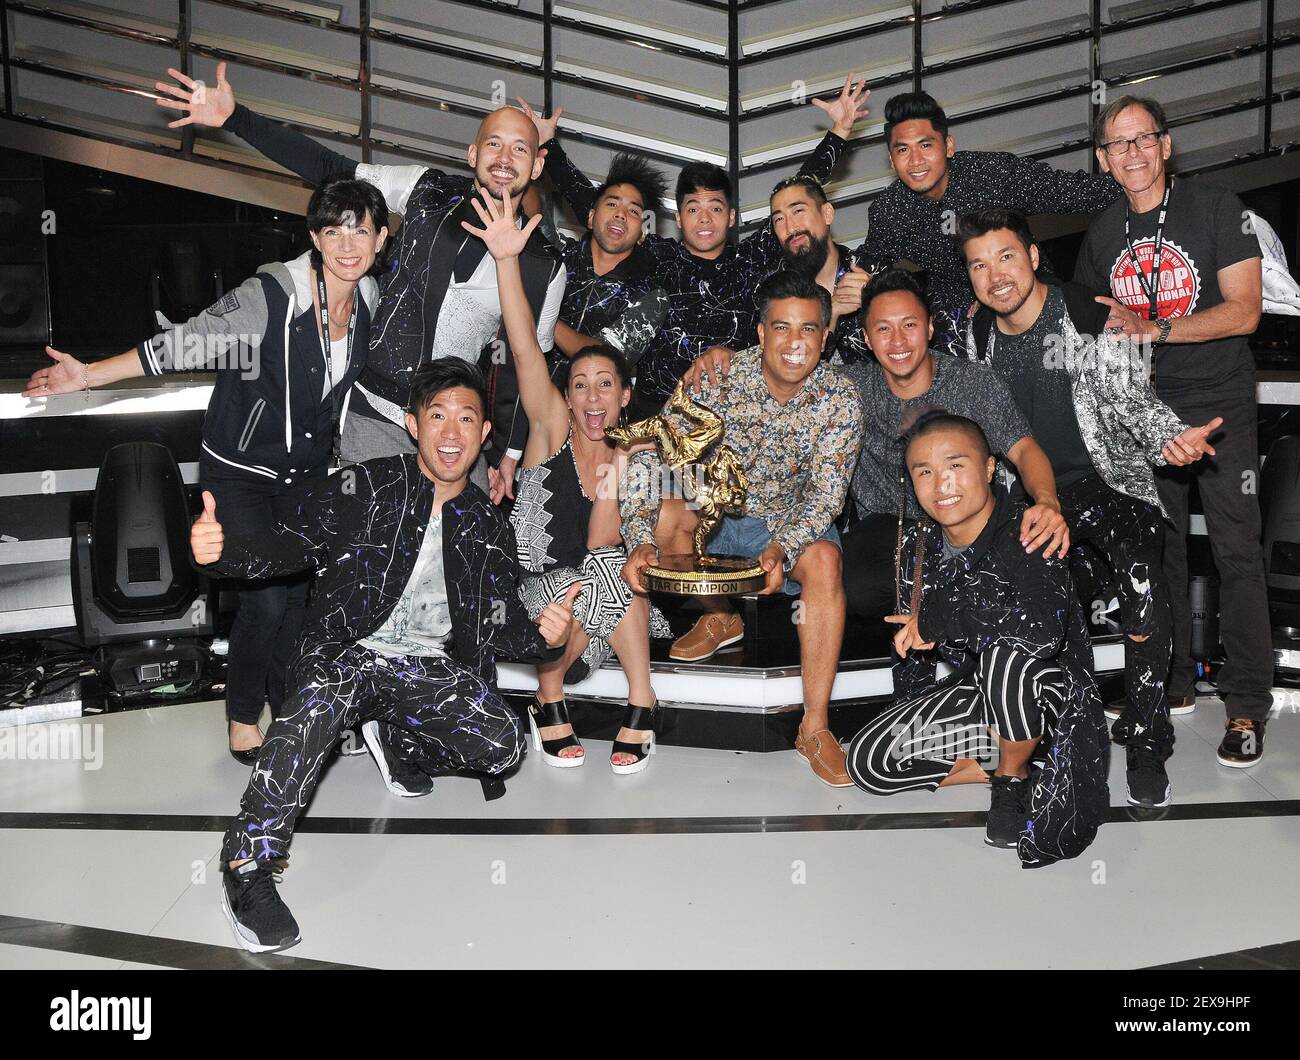 America's Best Dance Crew All Star Champion, Quest Crew with ABDC Executive Producers/Creators Karen Schwartz and Howard Schwartz and Co-Executive Producers Tabitha D'Umo and Napoleon D'Umo at the 'America's Best Dance Crew: Road To The VMA's' Finale held at the Warner Bros Lot Stage 19 in Burbank, CA on Saturday, August 29, 2015. (Photo By Sthanlee B. Mirador) *** Please Use Credit from Credit Field *** Stock Photo